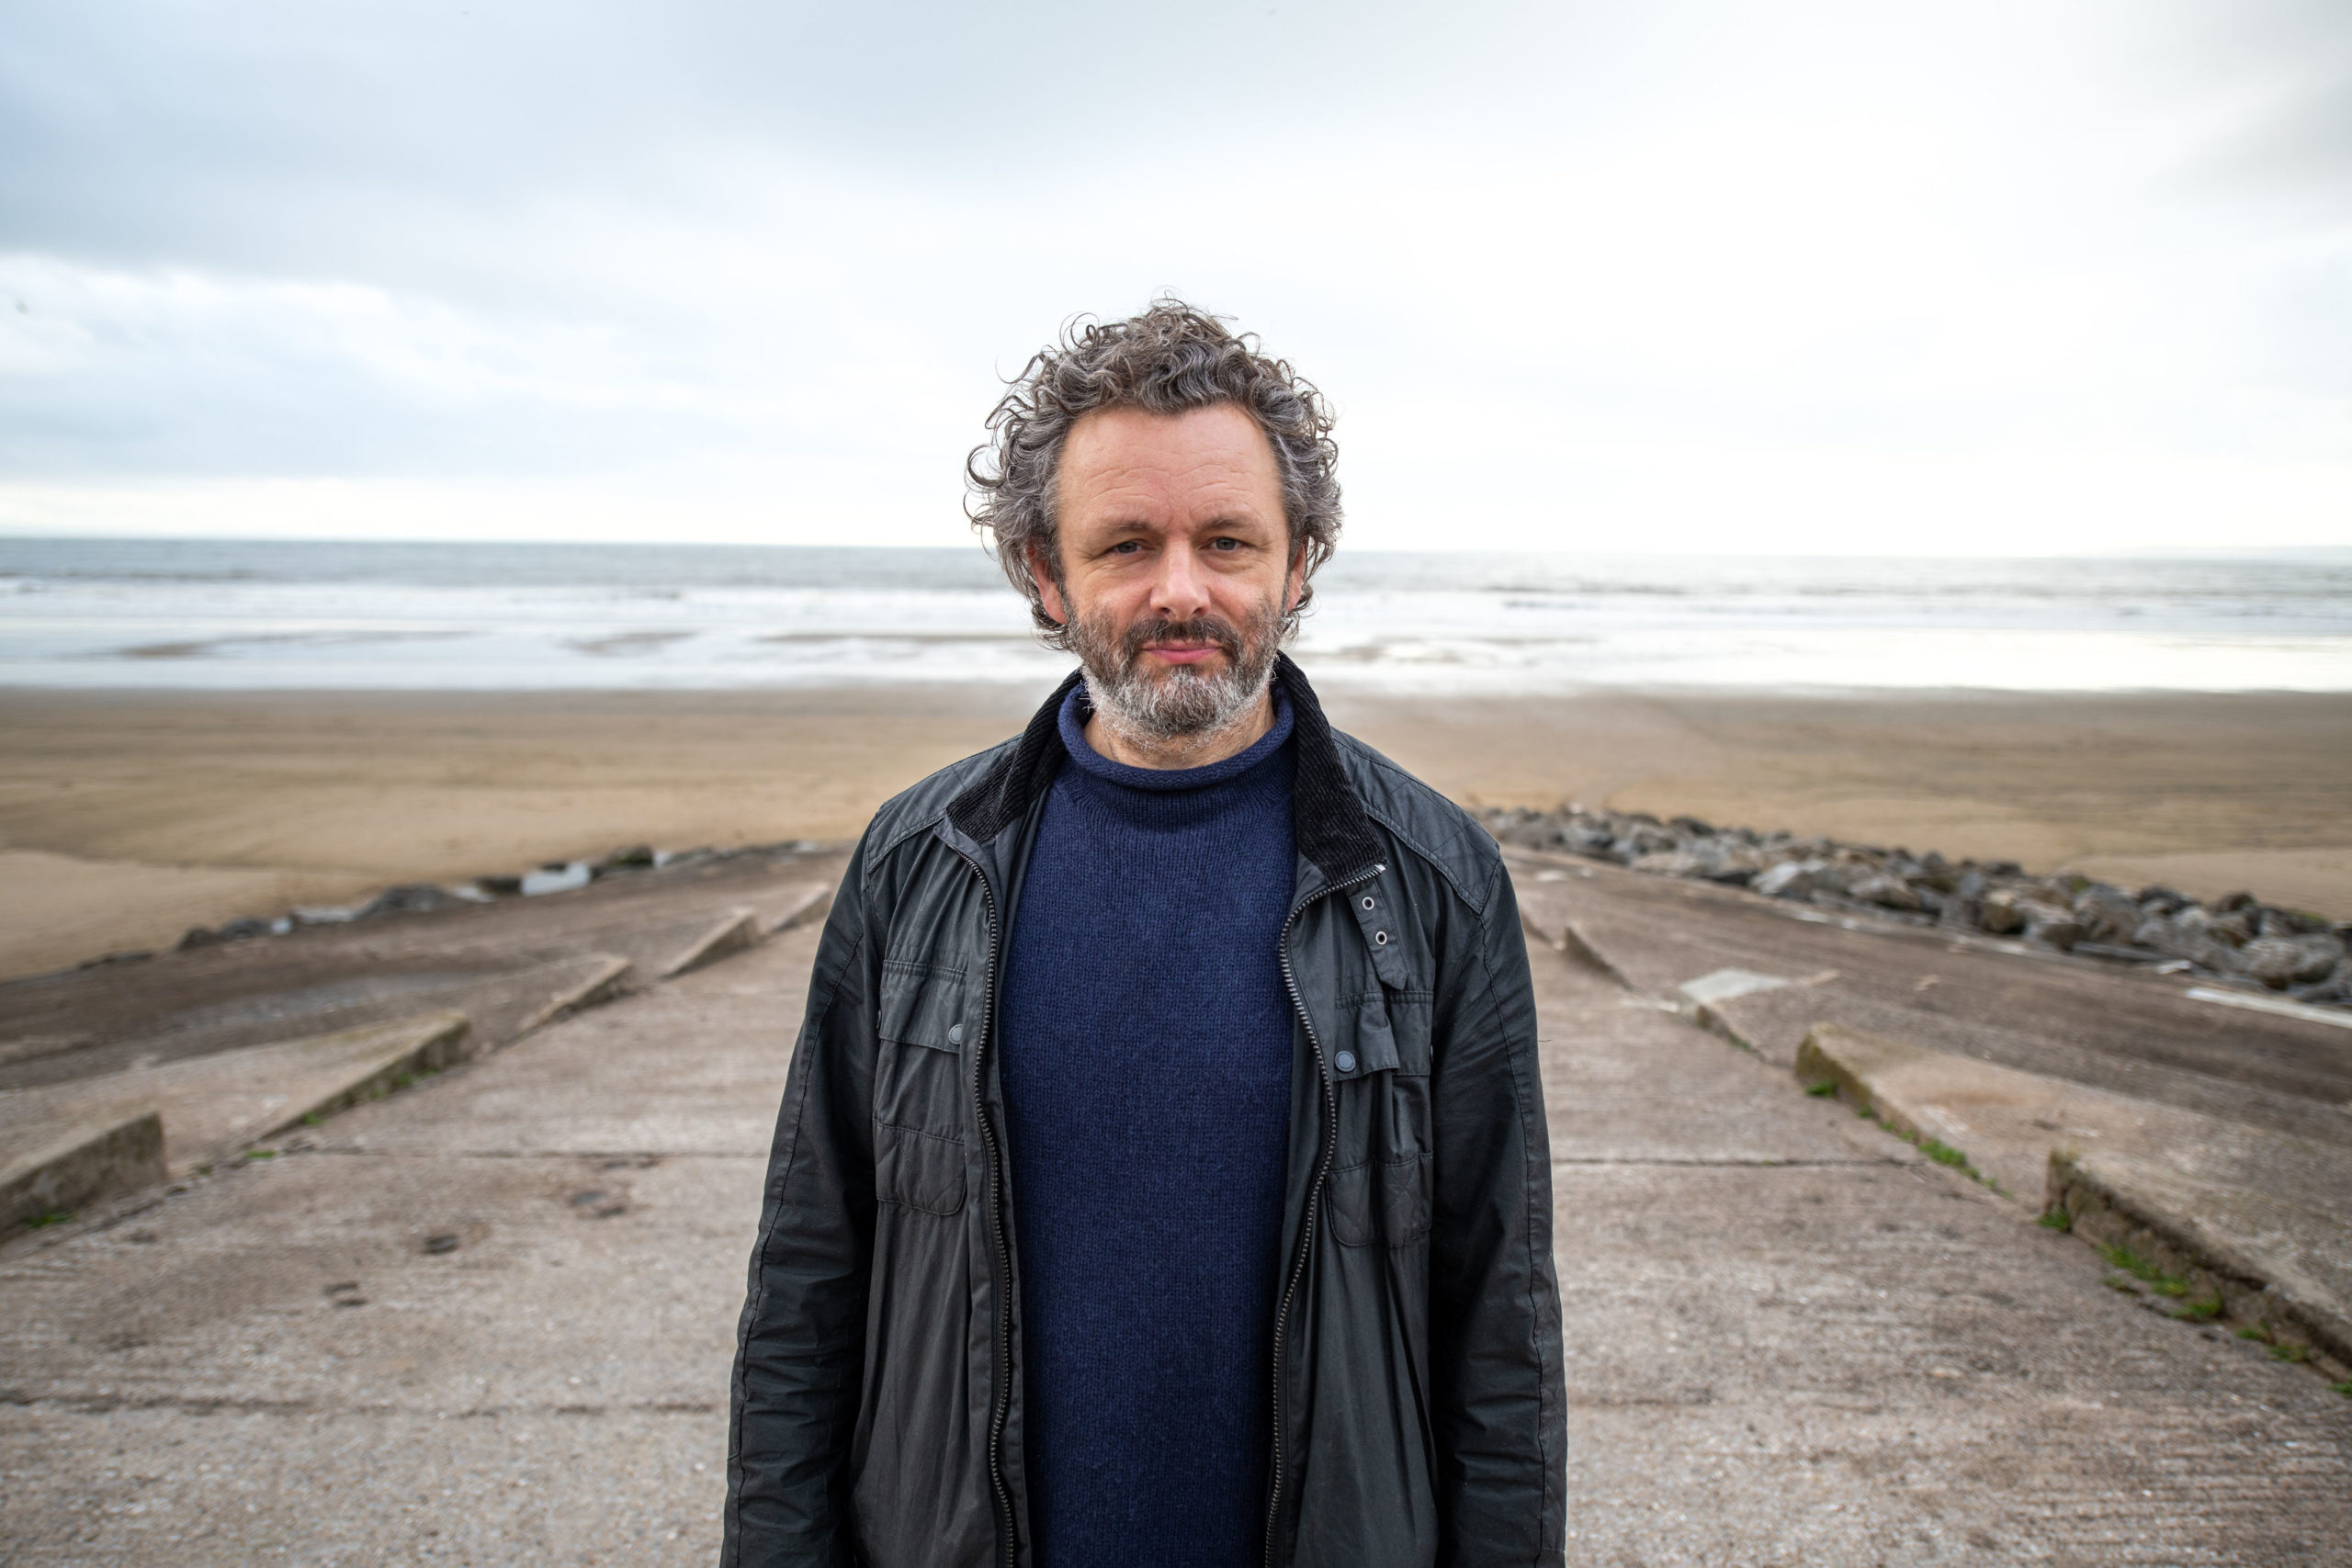 Michael Sheen in his hometown of Port Talbot, where he performed The Passion. Credit: BBC/ClearStory/Menace